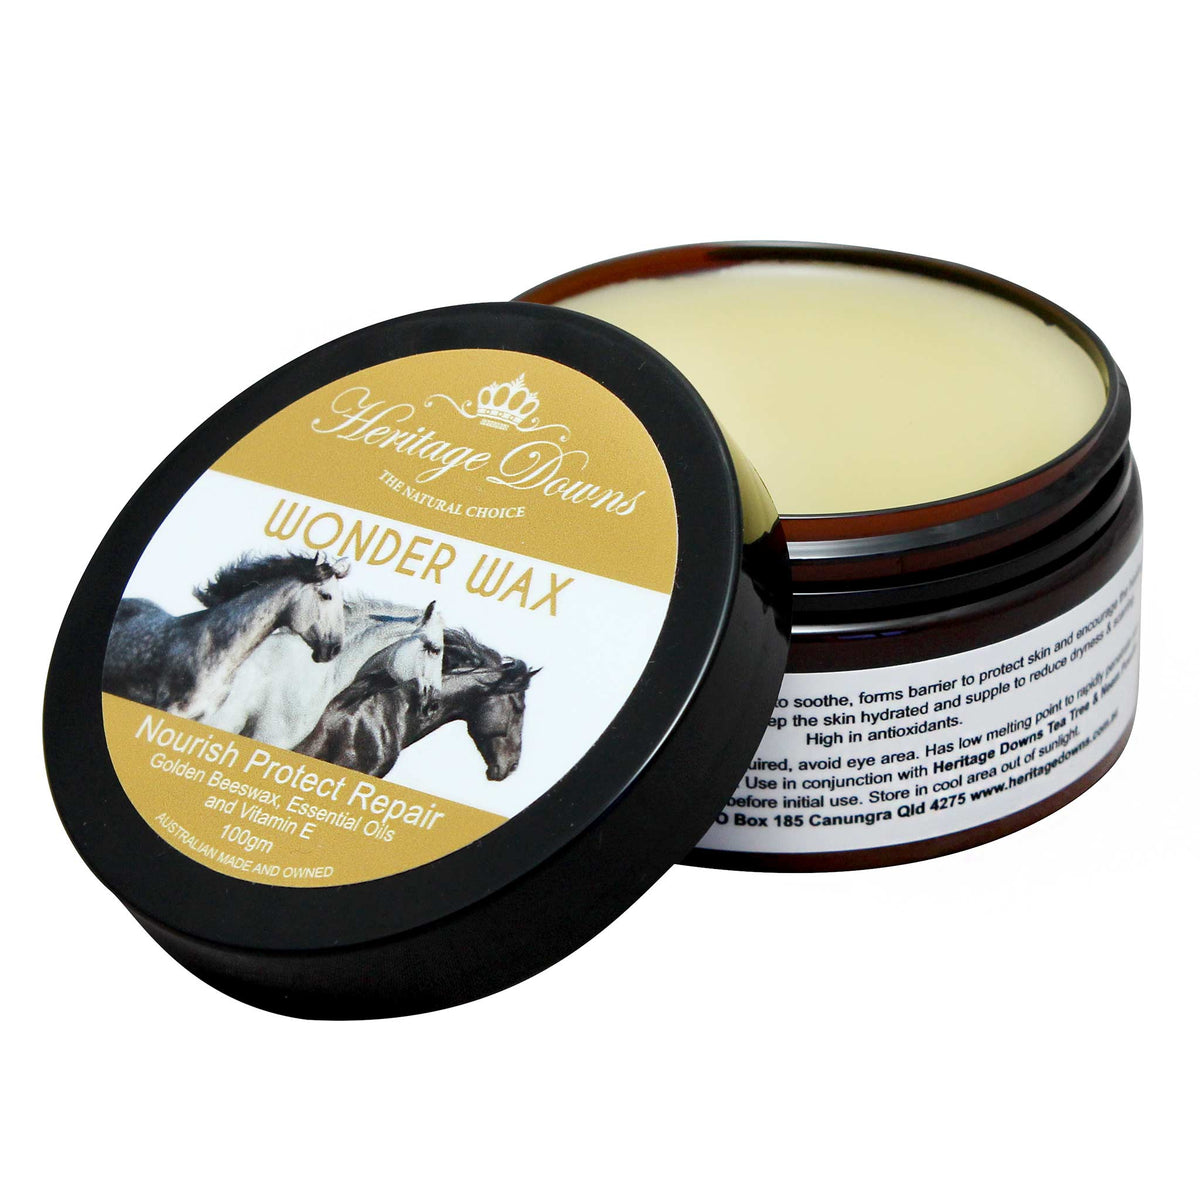 Heritage Downs Wonder Wax with Essential Oils and Vitamin E